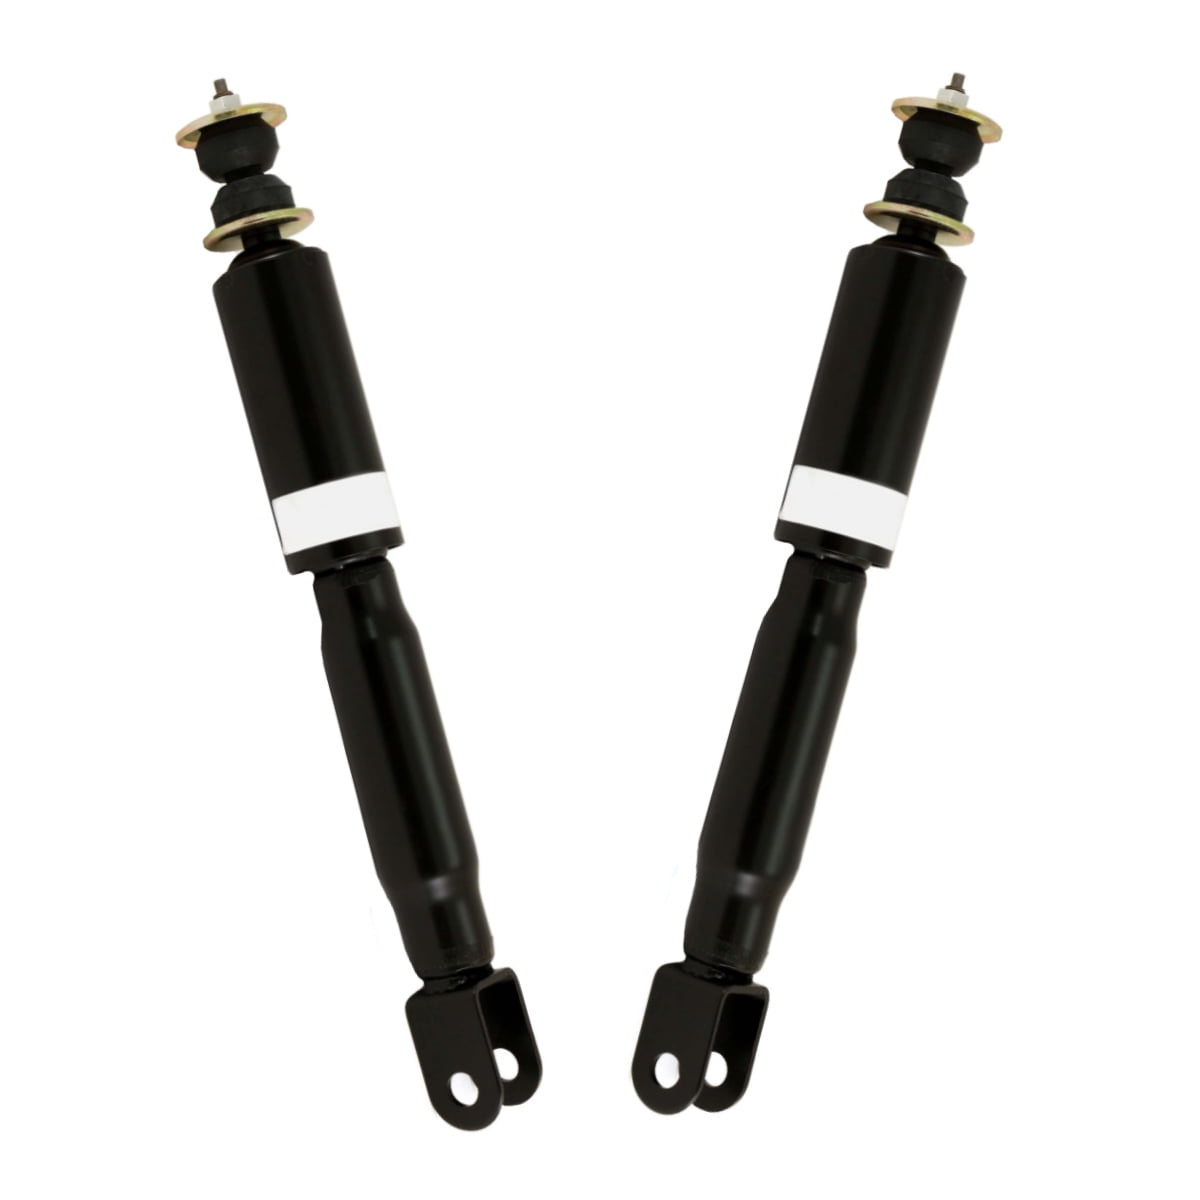 Front Struts Replacement for 2007-2013 Chevy Silverado Suburban 1500 Avalanche Tahoe GMC Sierra 1500 Yukon Excludes Electronic Suspension and Lift Kits Detroit Axle - 2pc Set 